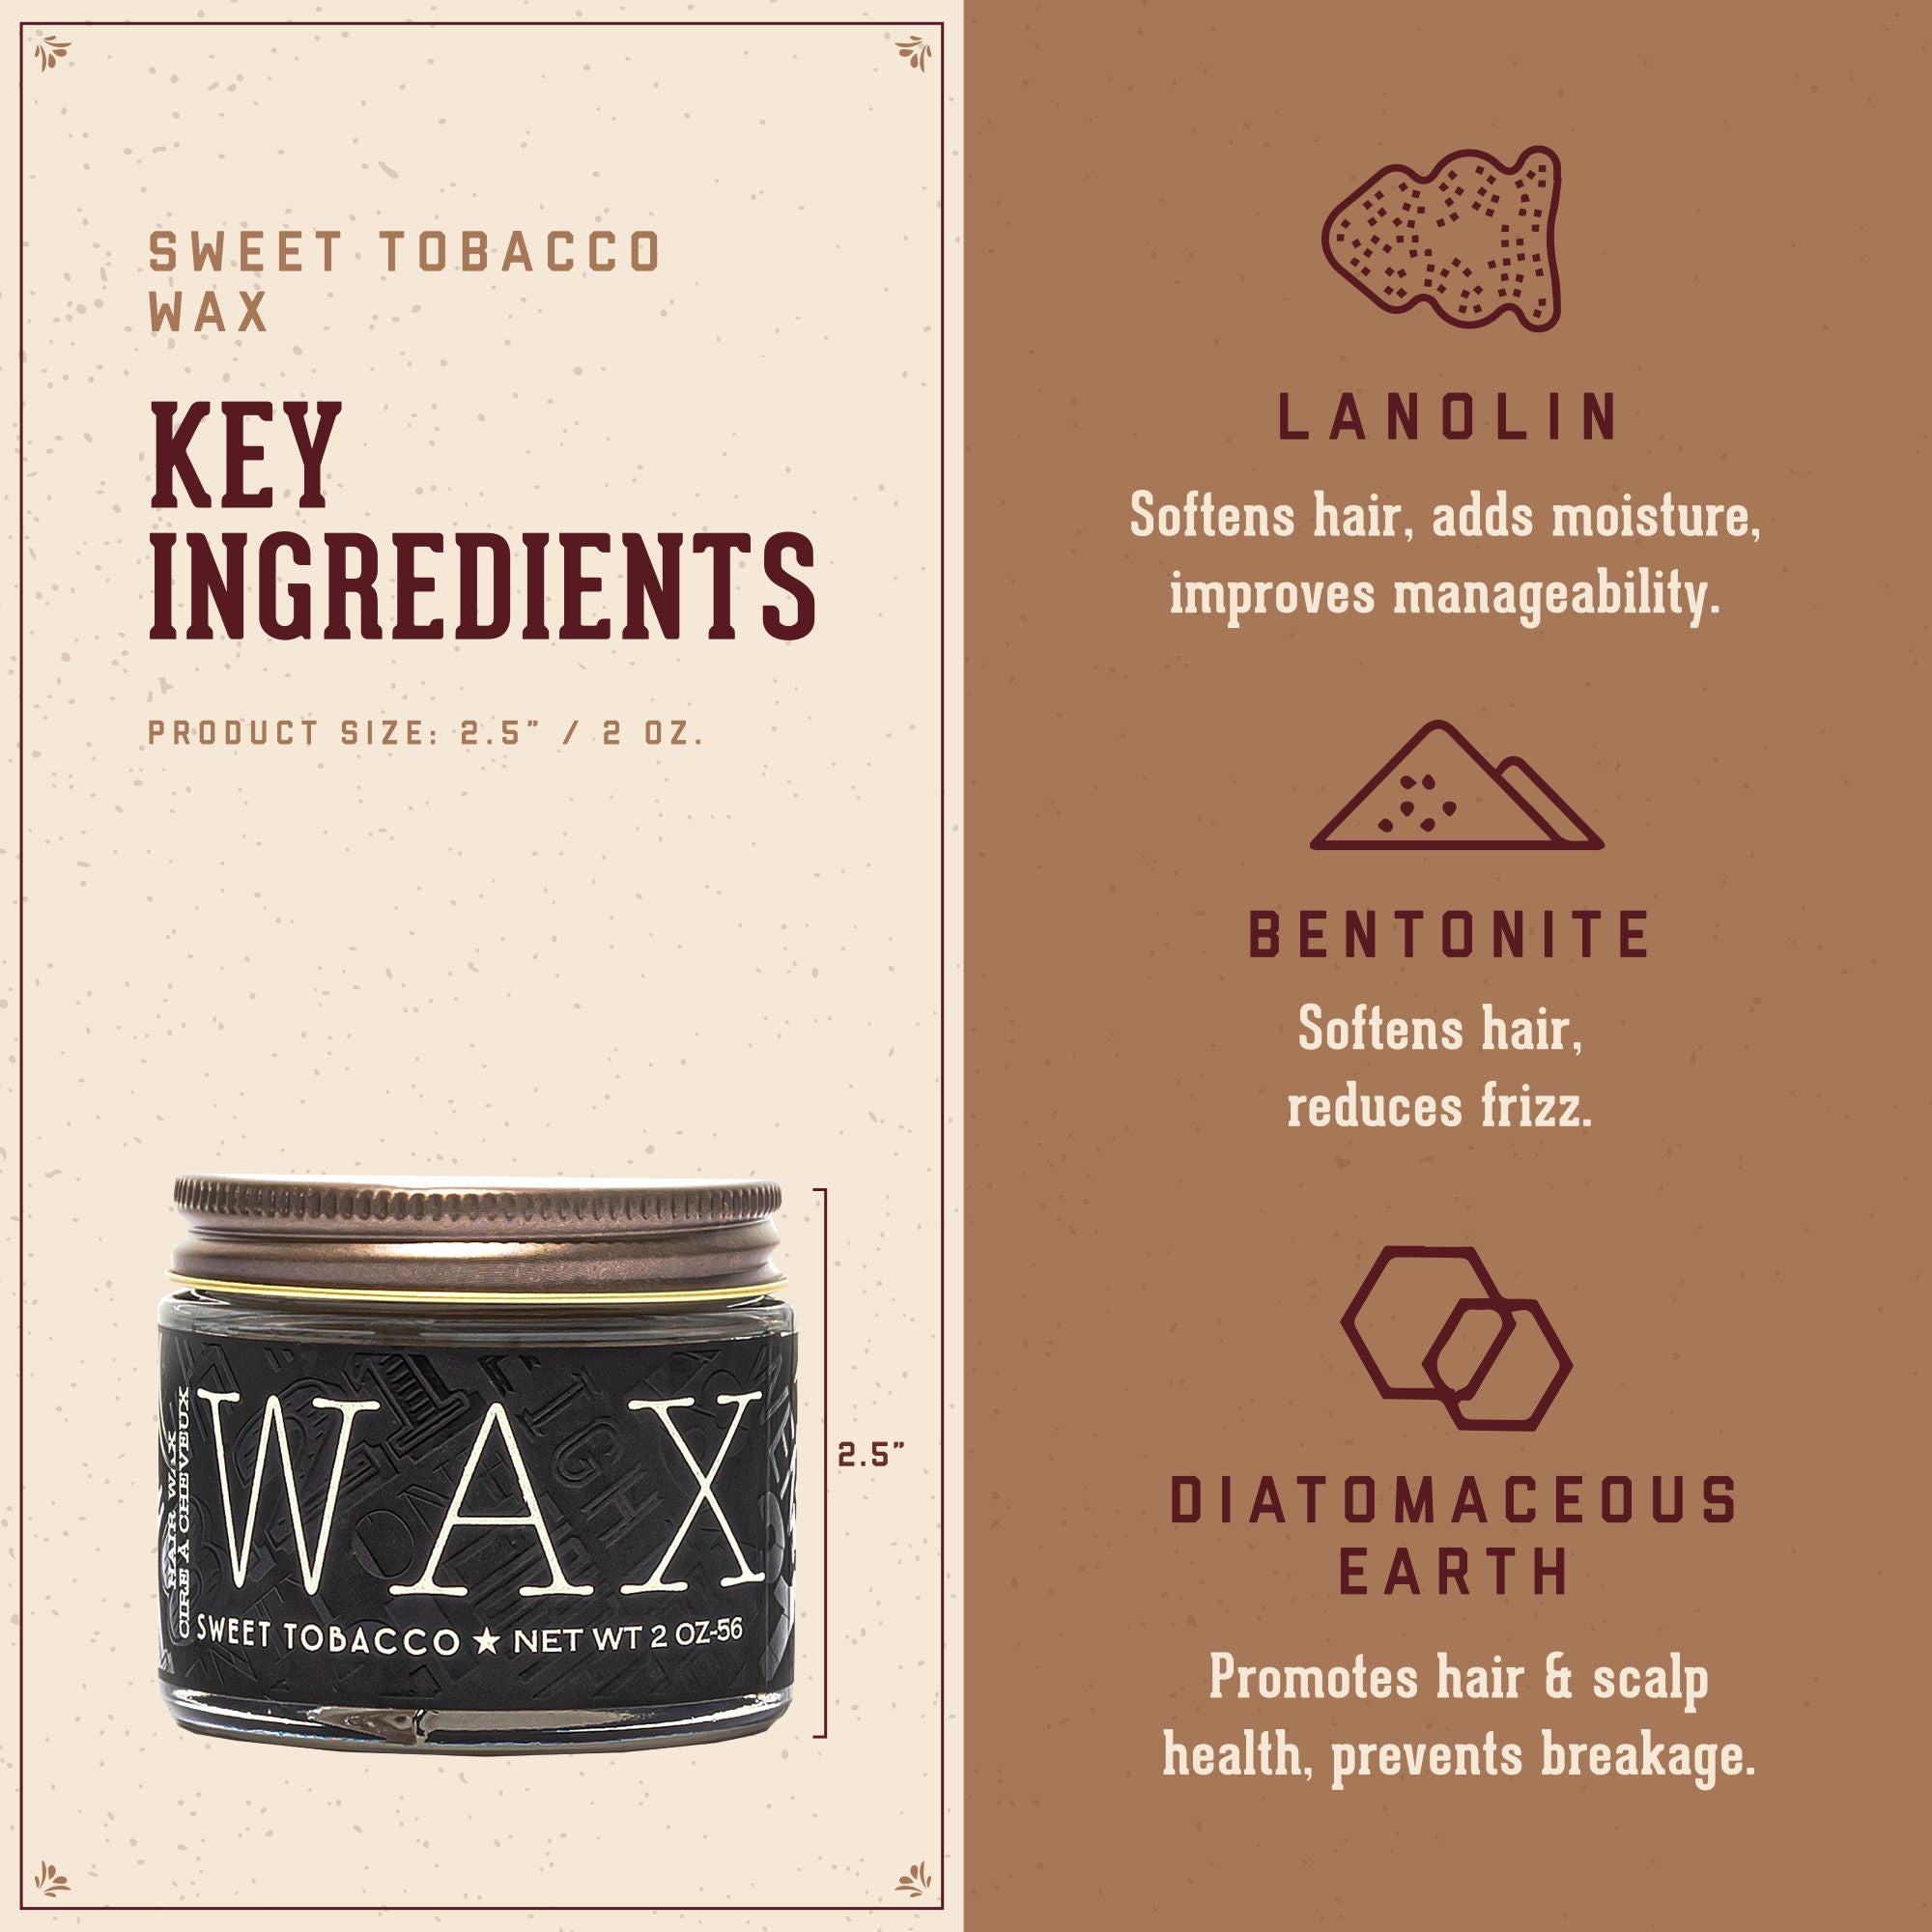 Sweet Tobacco Wax Key Ingredients.   1. Lanolin: softens hair, adds moisture, improves manageability.  2. Bentonite: softens hair, reduces frizz. 3. Diatomaceous Earth: promotes hair and scalp health, prevents breakage.